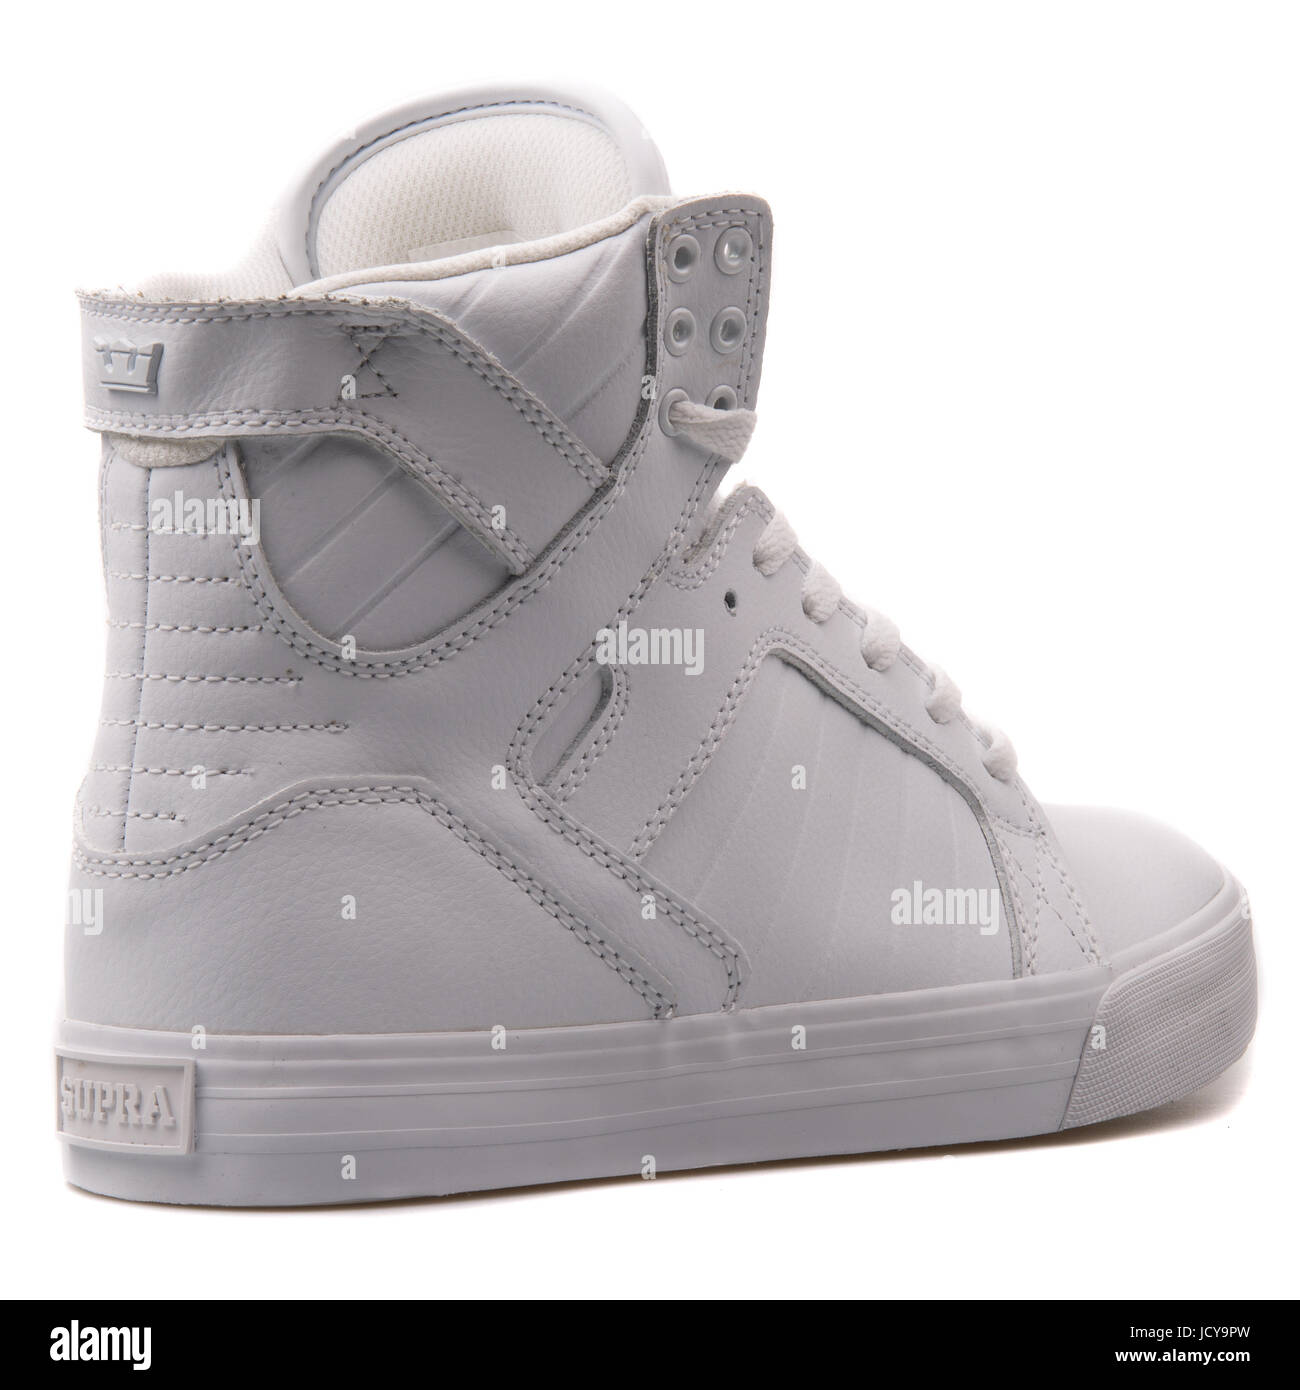 Supra Skytop chaussures sportives pour hommes Blanc - S18087 Photo Stock -  Alamy